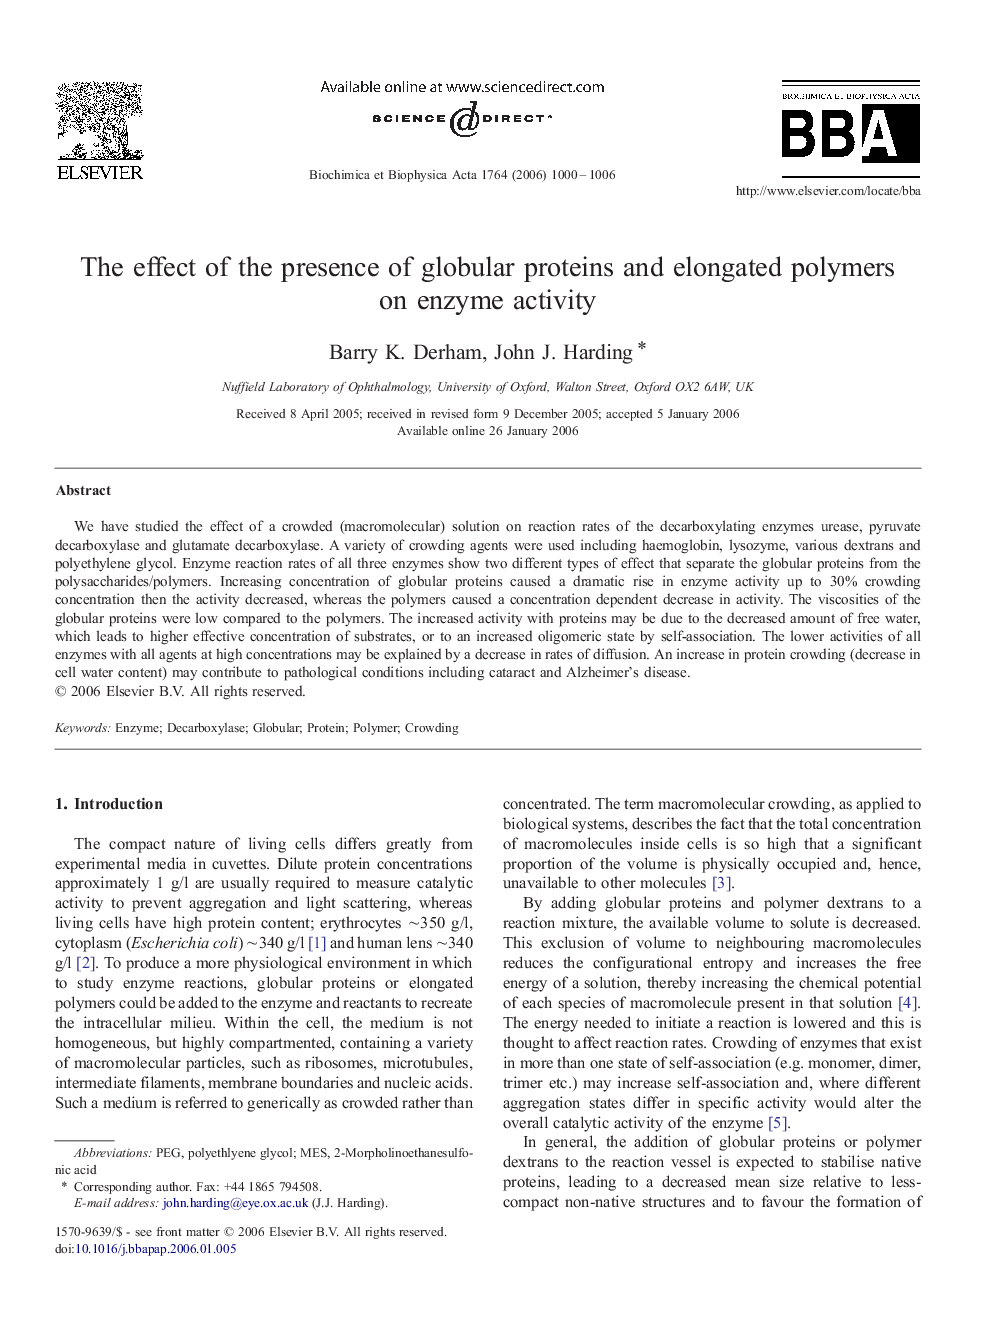 The effect of the presence of globular proteins and elongated polymers on enzyme activity